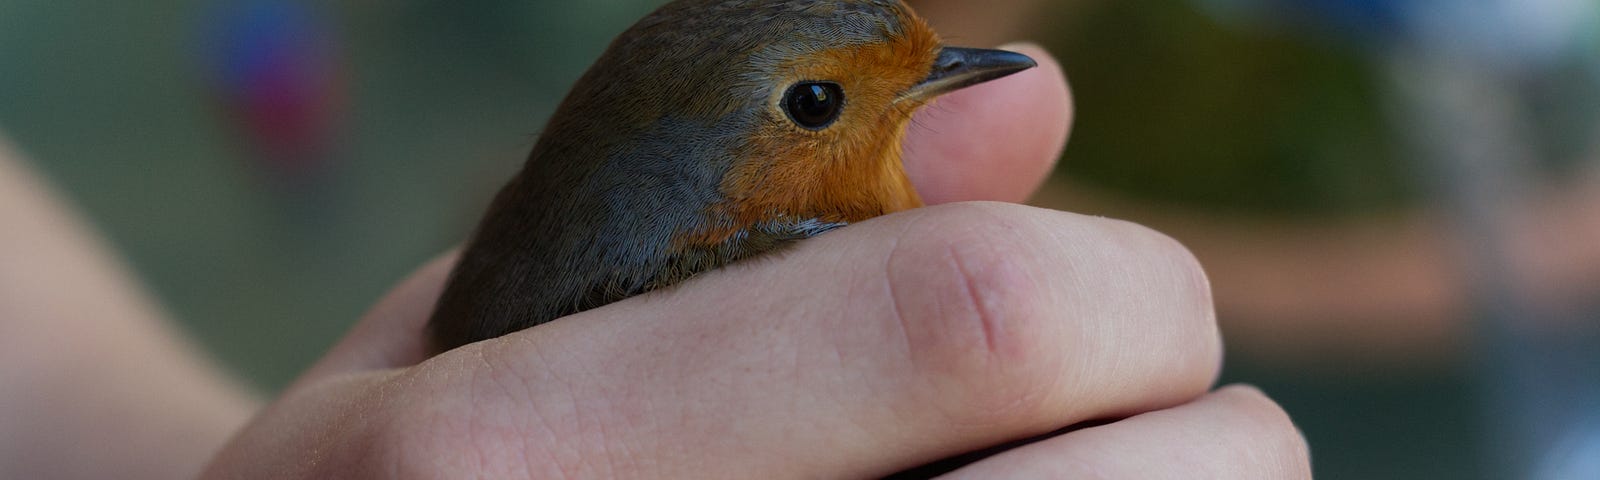 A bird (a robin) is being held in a person’s cupped hand